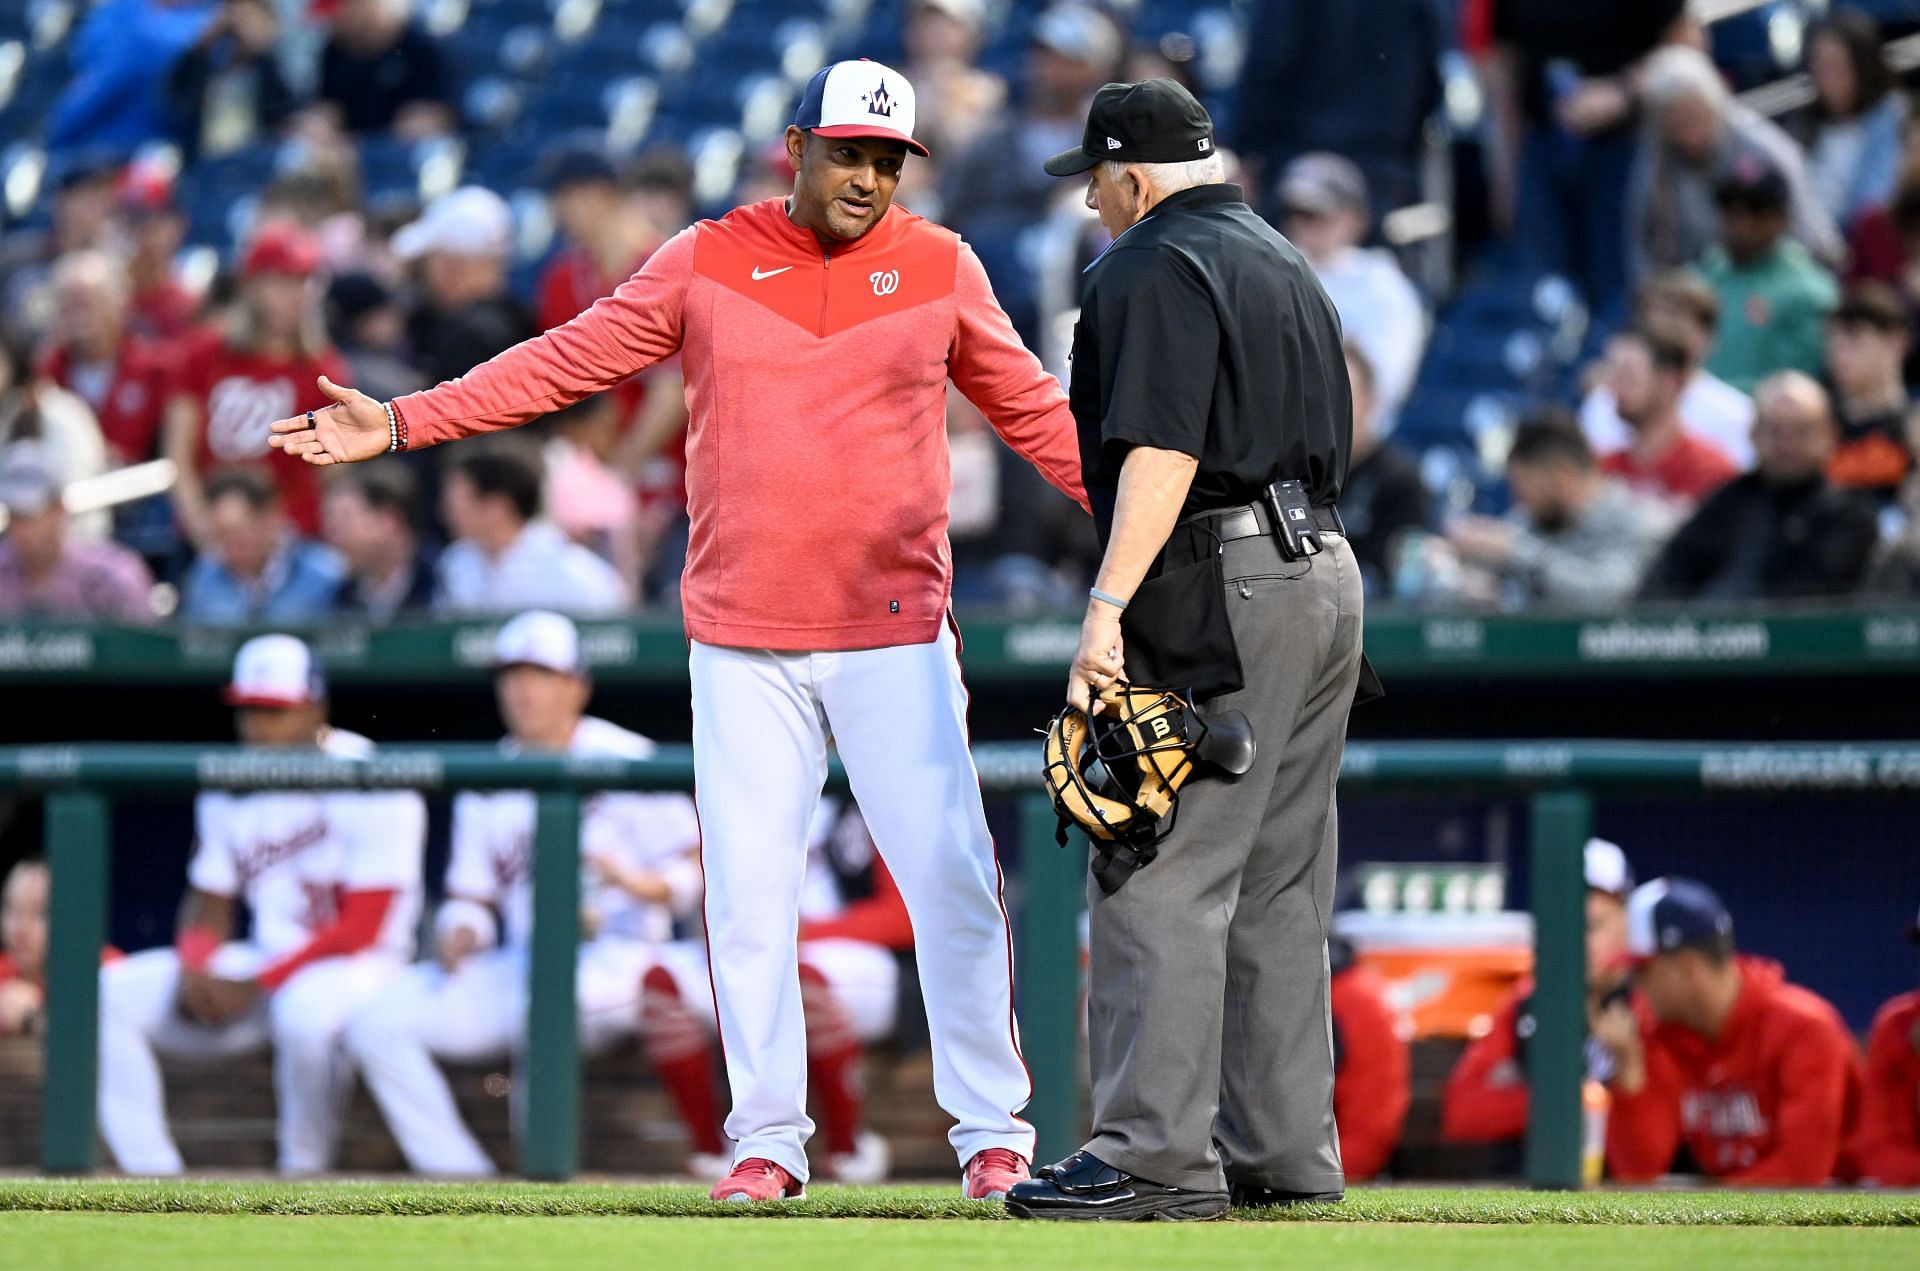 Larry Vanover is the MLB umpire who was hit in the head